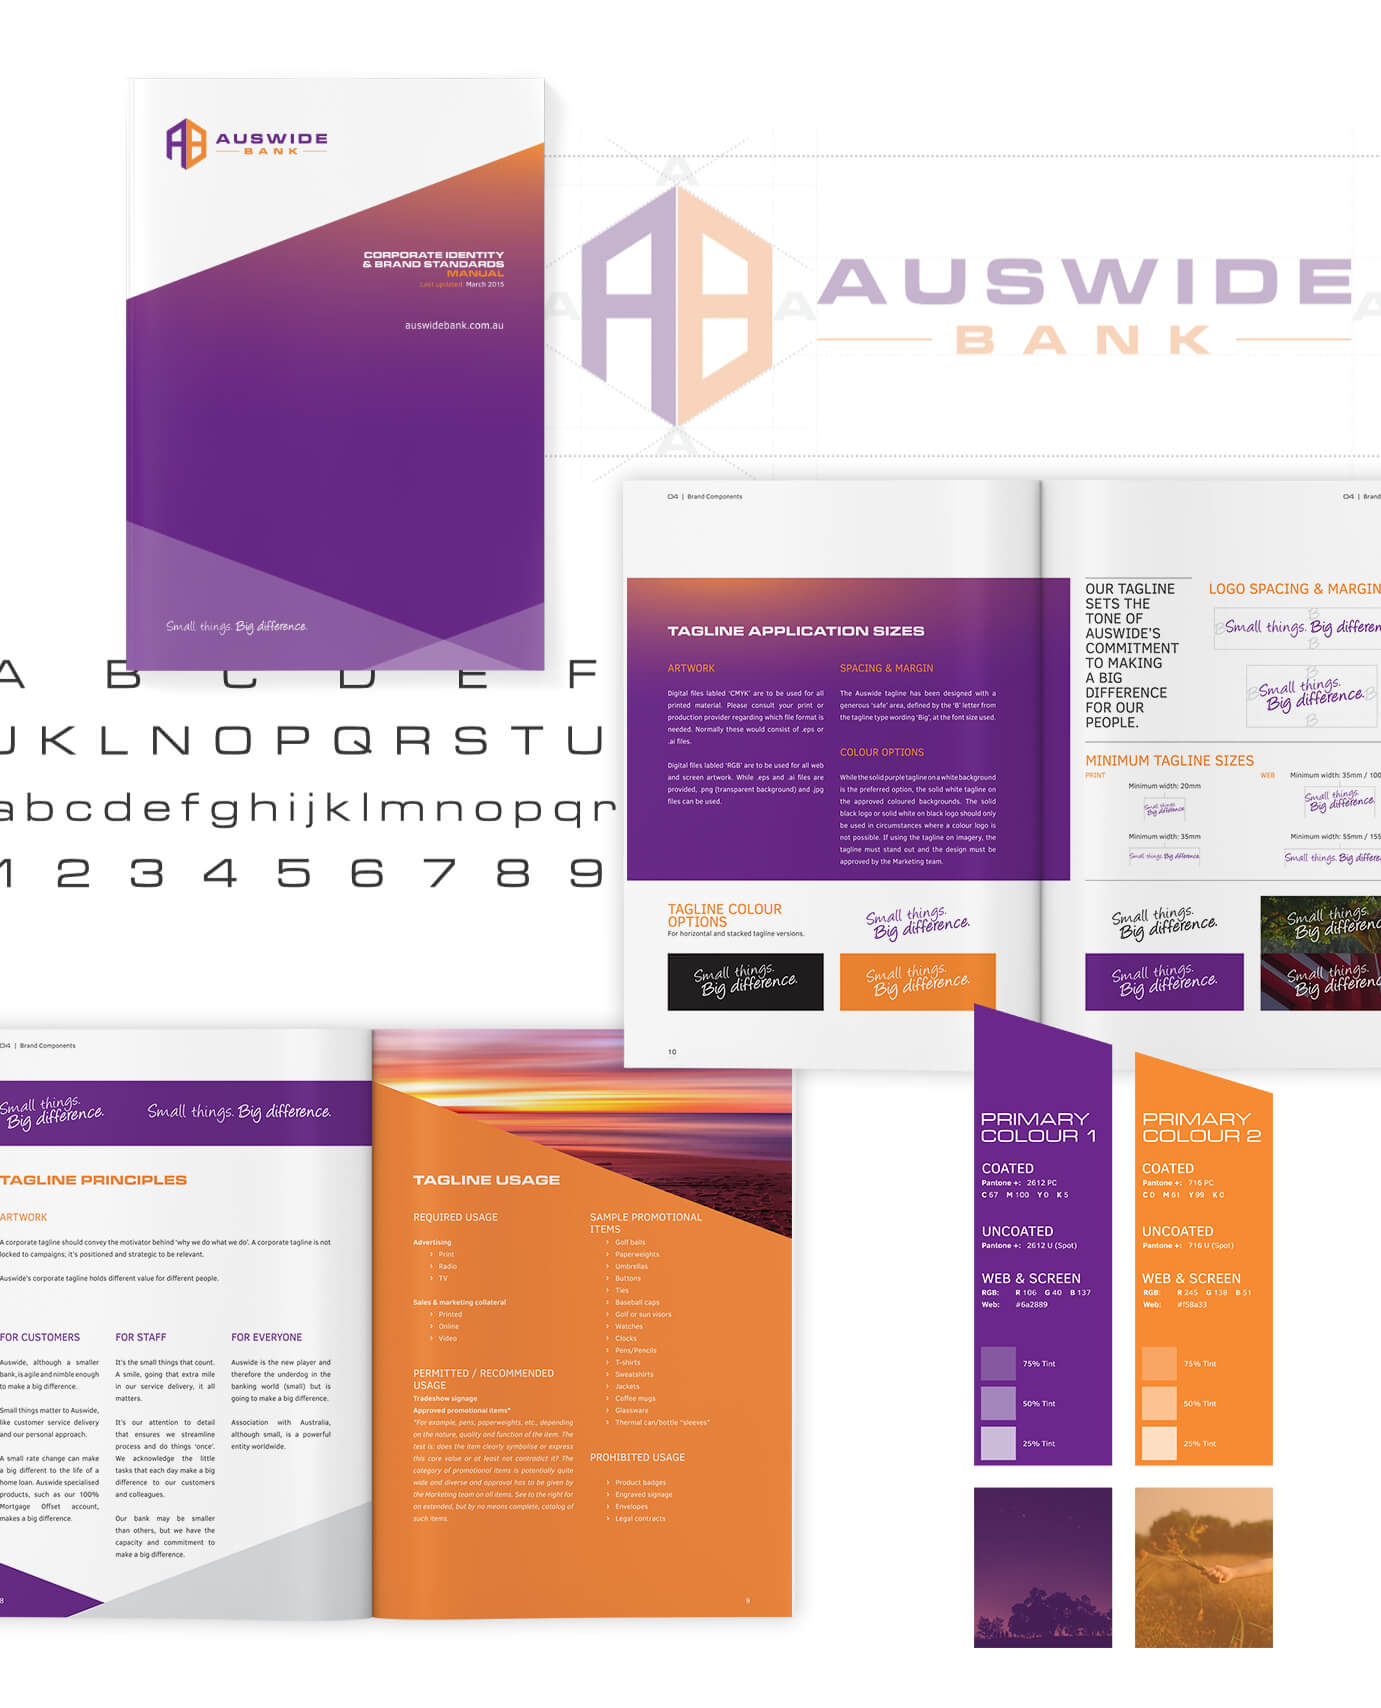 Auswide Bank Brand Guidelines mobile feature